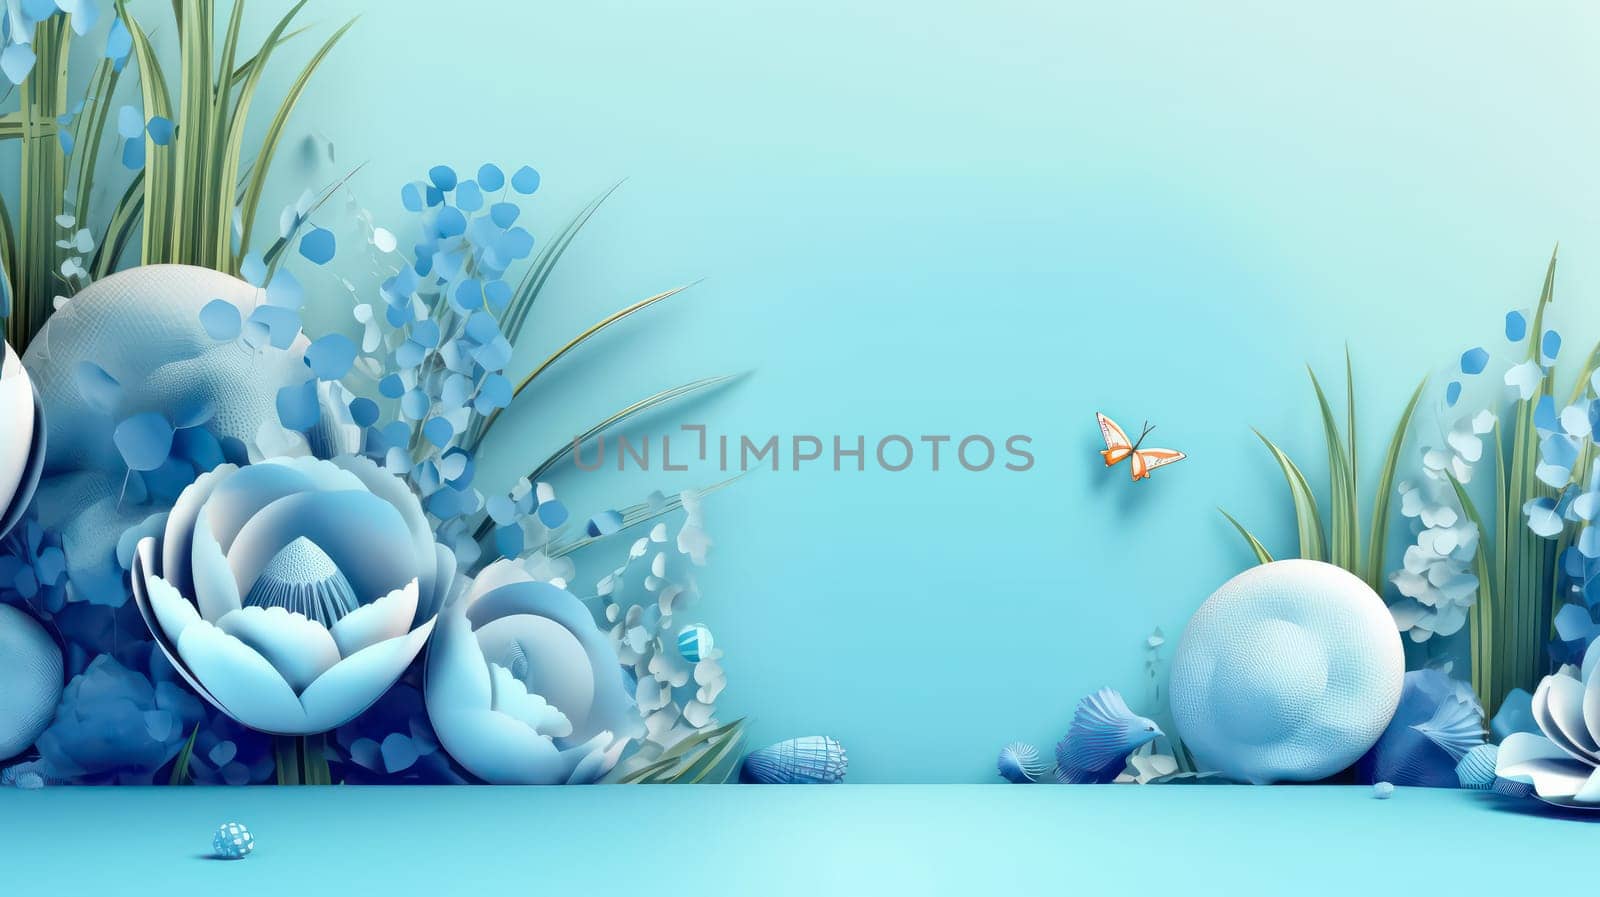 Celebrate Easter with this vibrant background adorned with colorful flowers, creating a festive and cheerful atmosphere. Ample space for adding your personalized text.